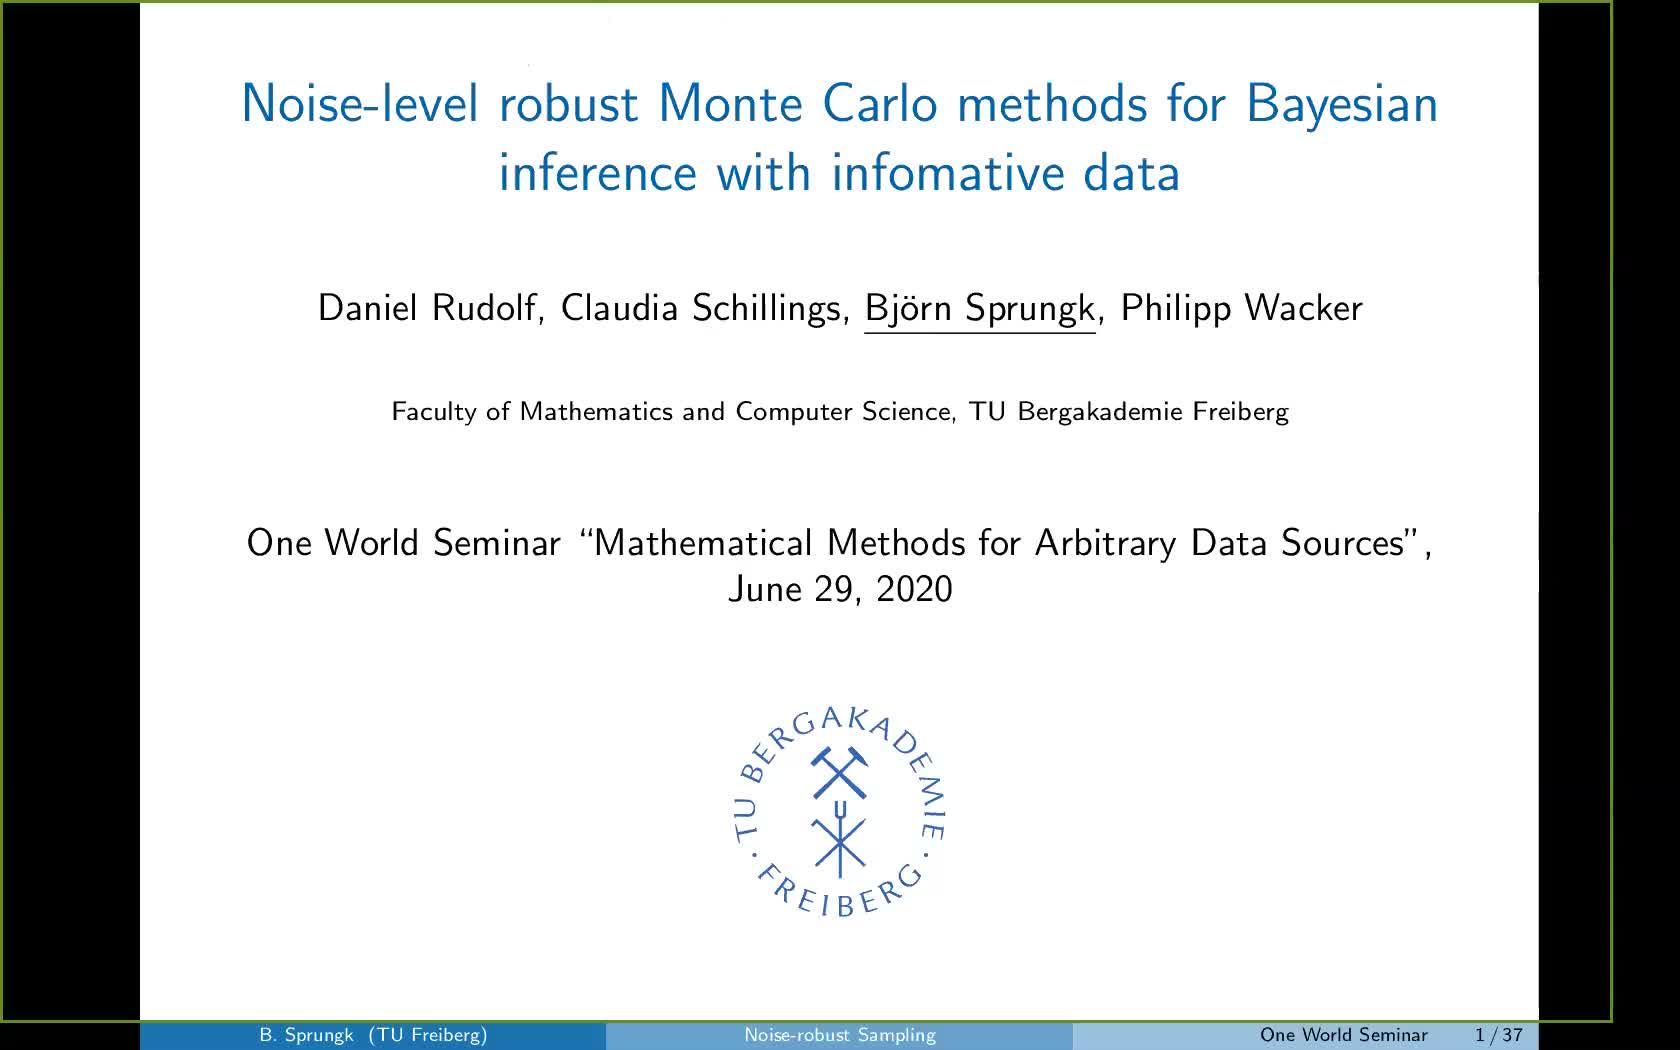 Björn Sprungk: Noise-level robust Monte Carlo methods for Bayesian inference with infomative data preview image